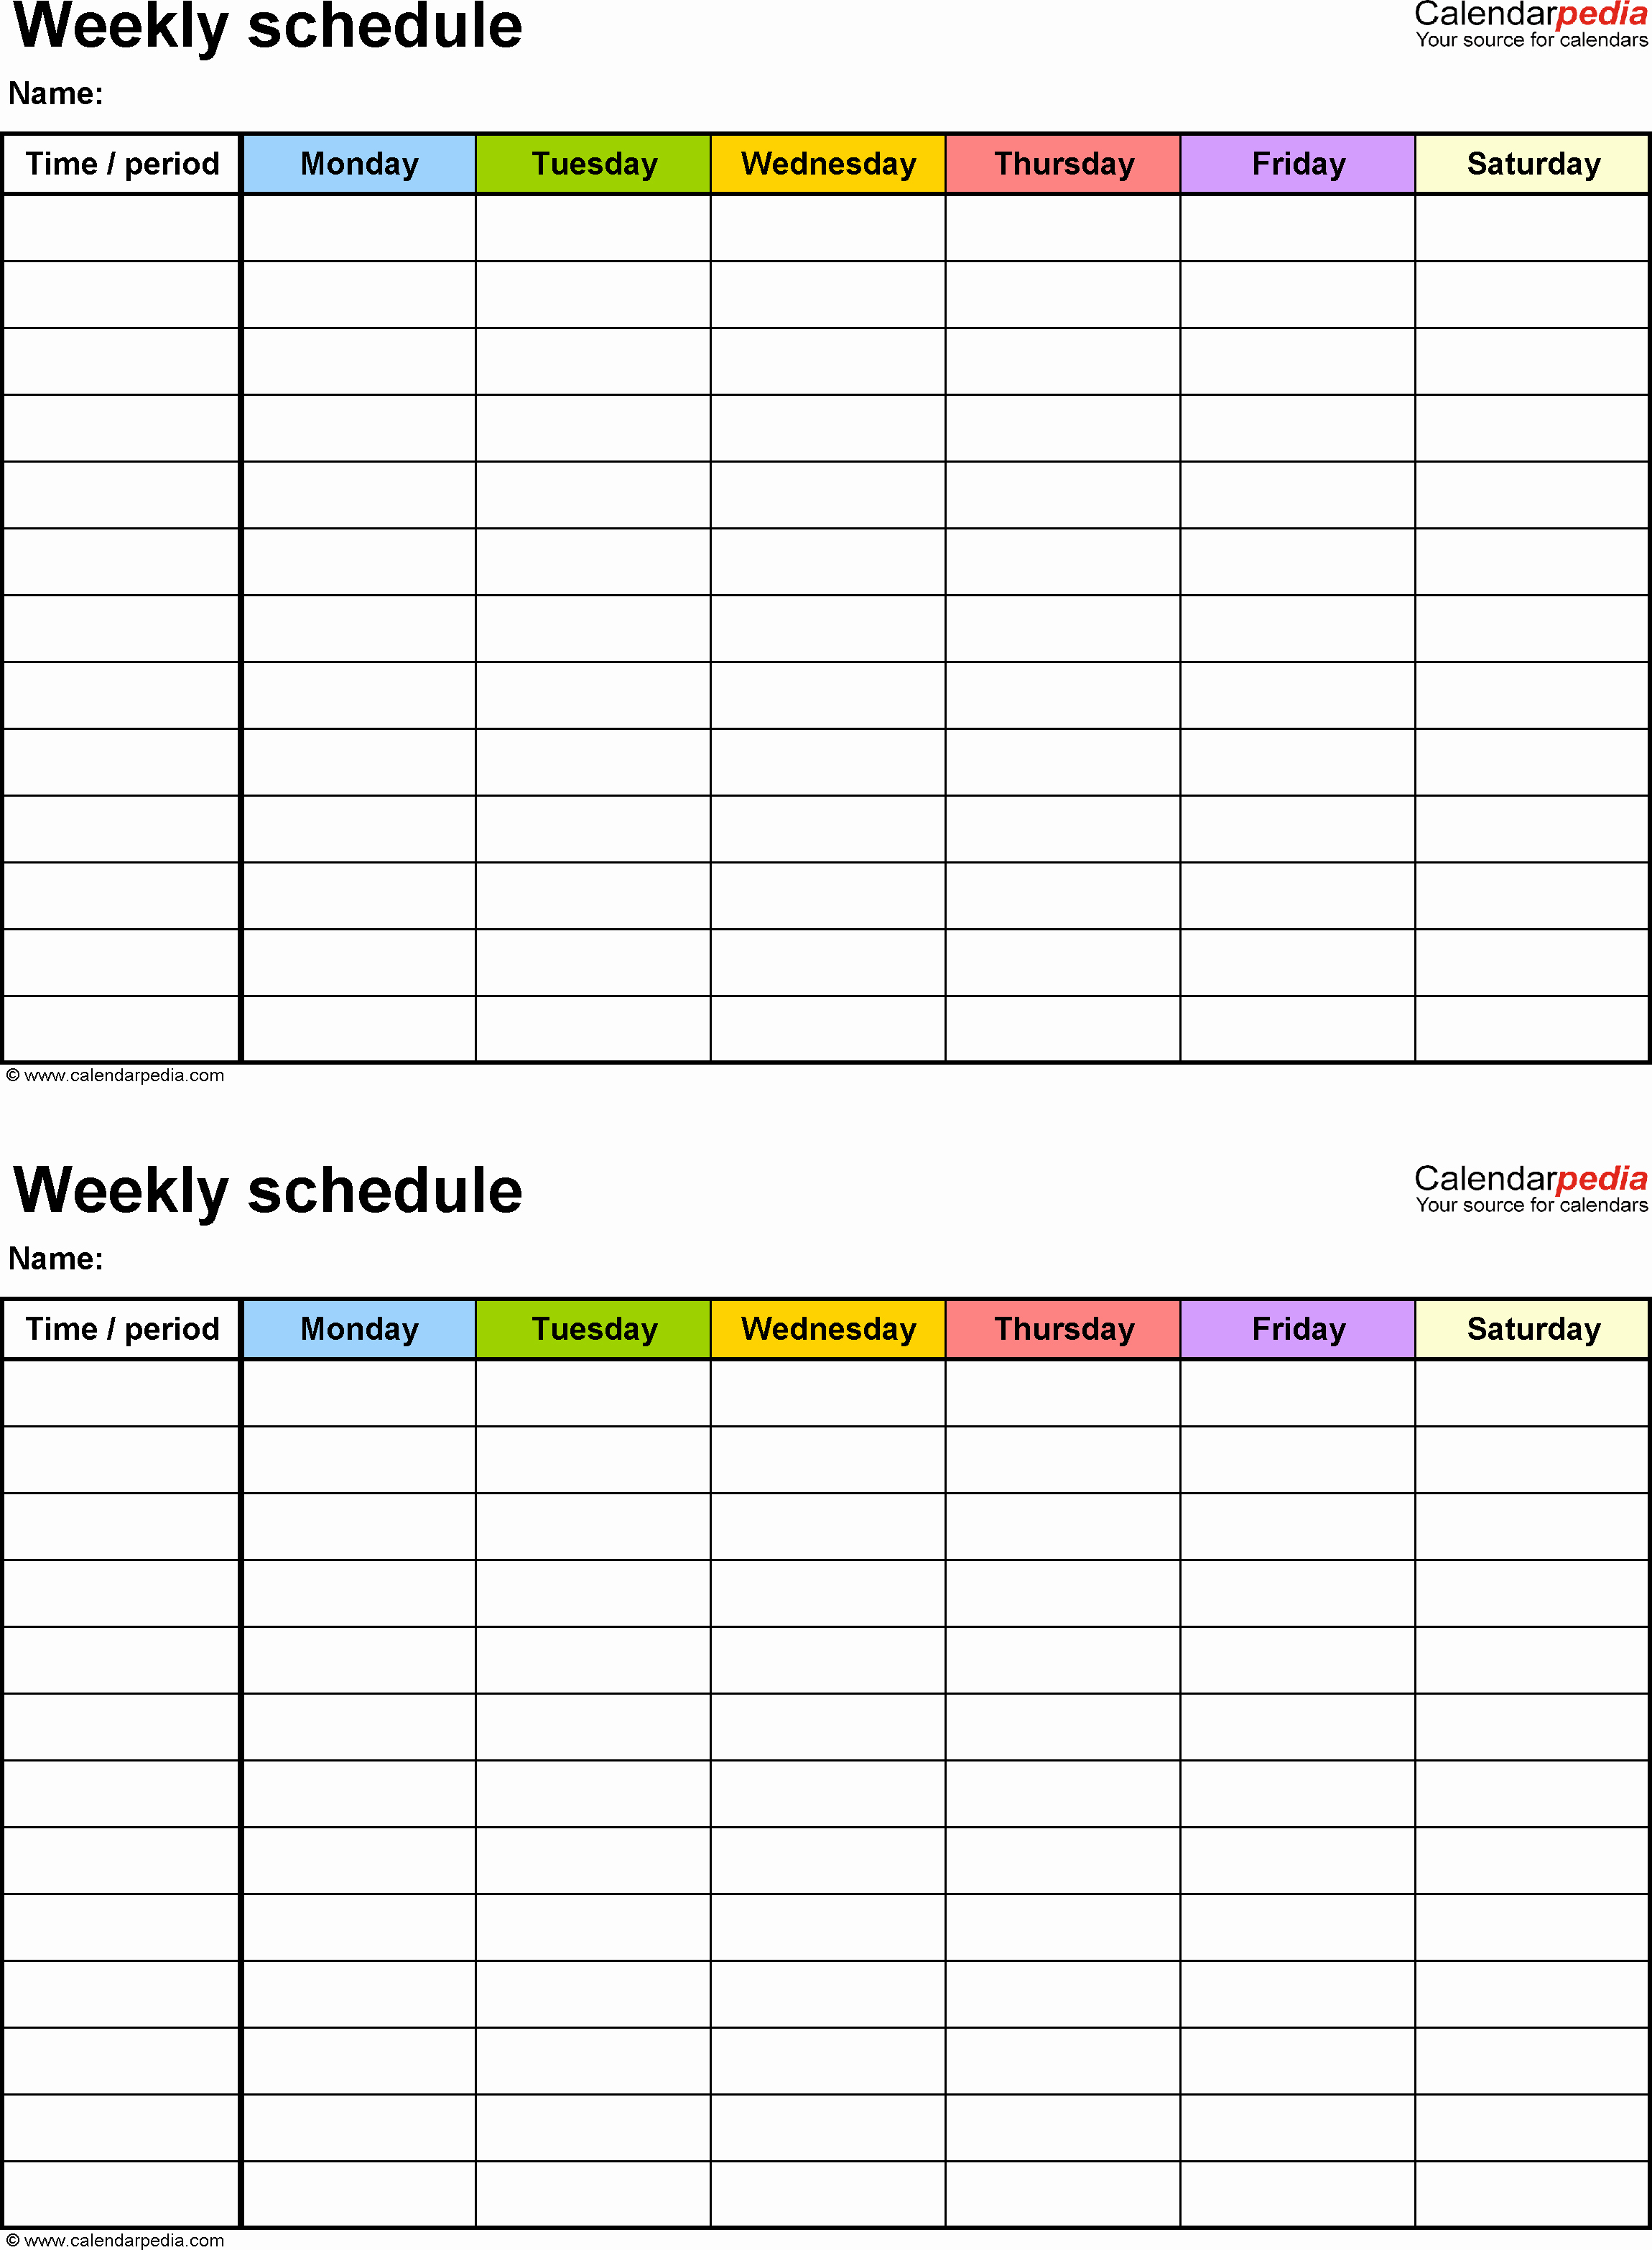 Create Calendar In Word New Weekly Schedule Template for Word Version 9 2 Schedules